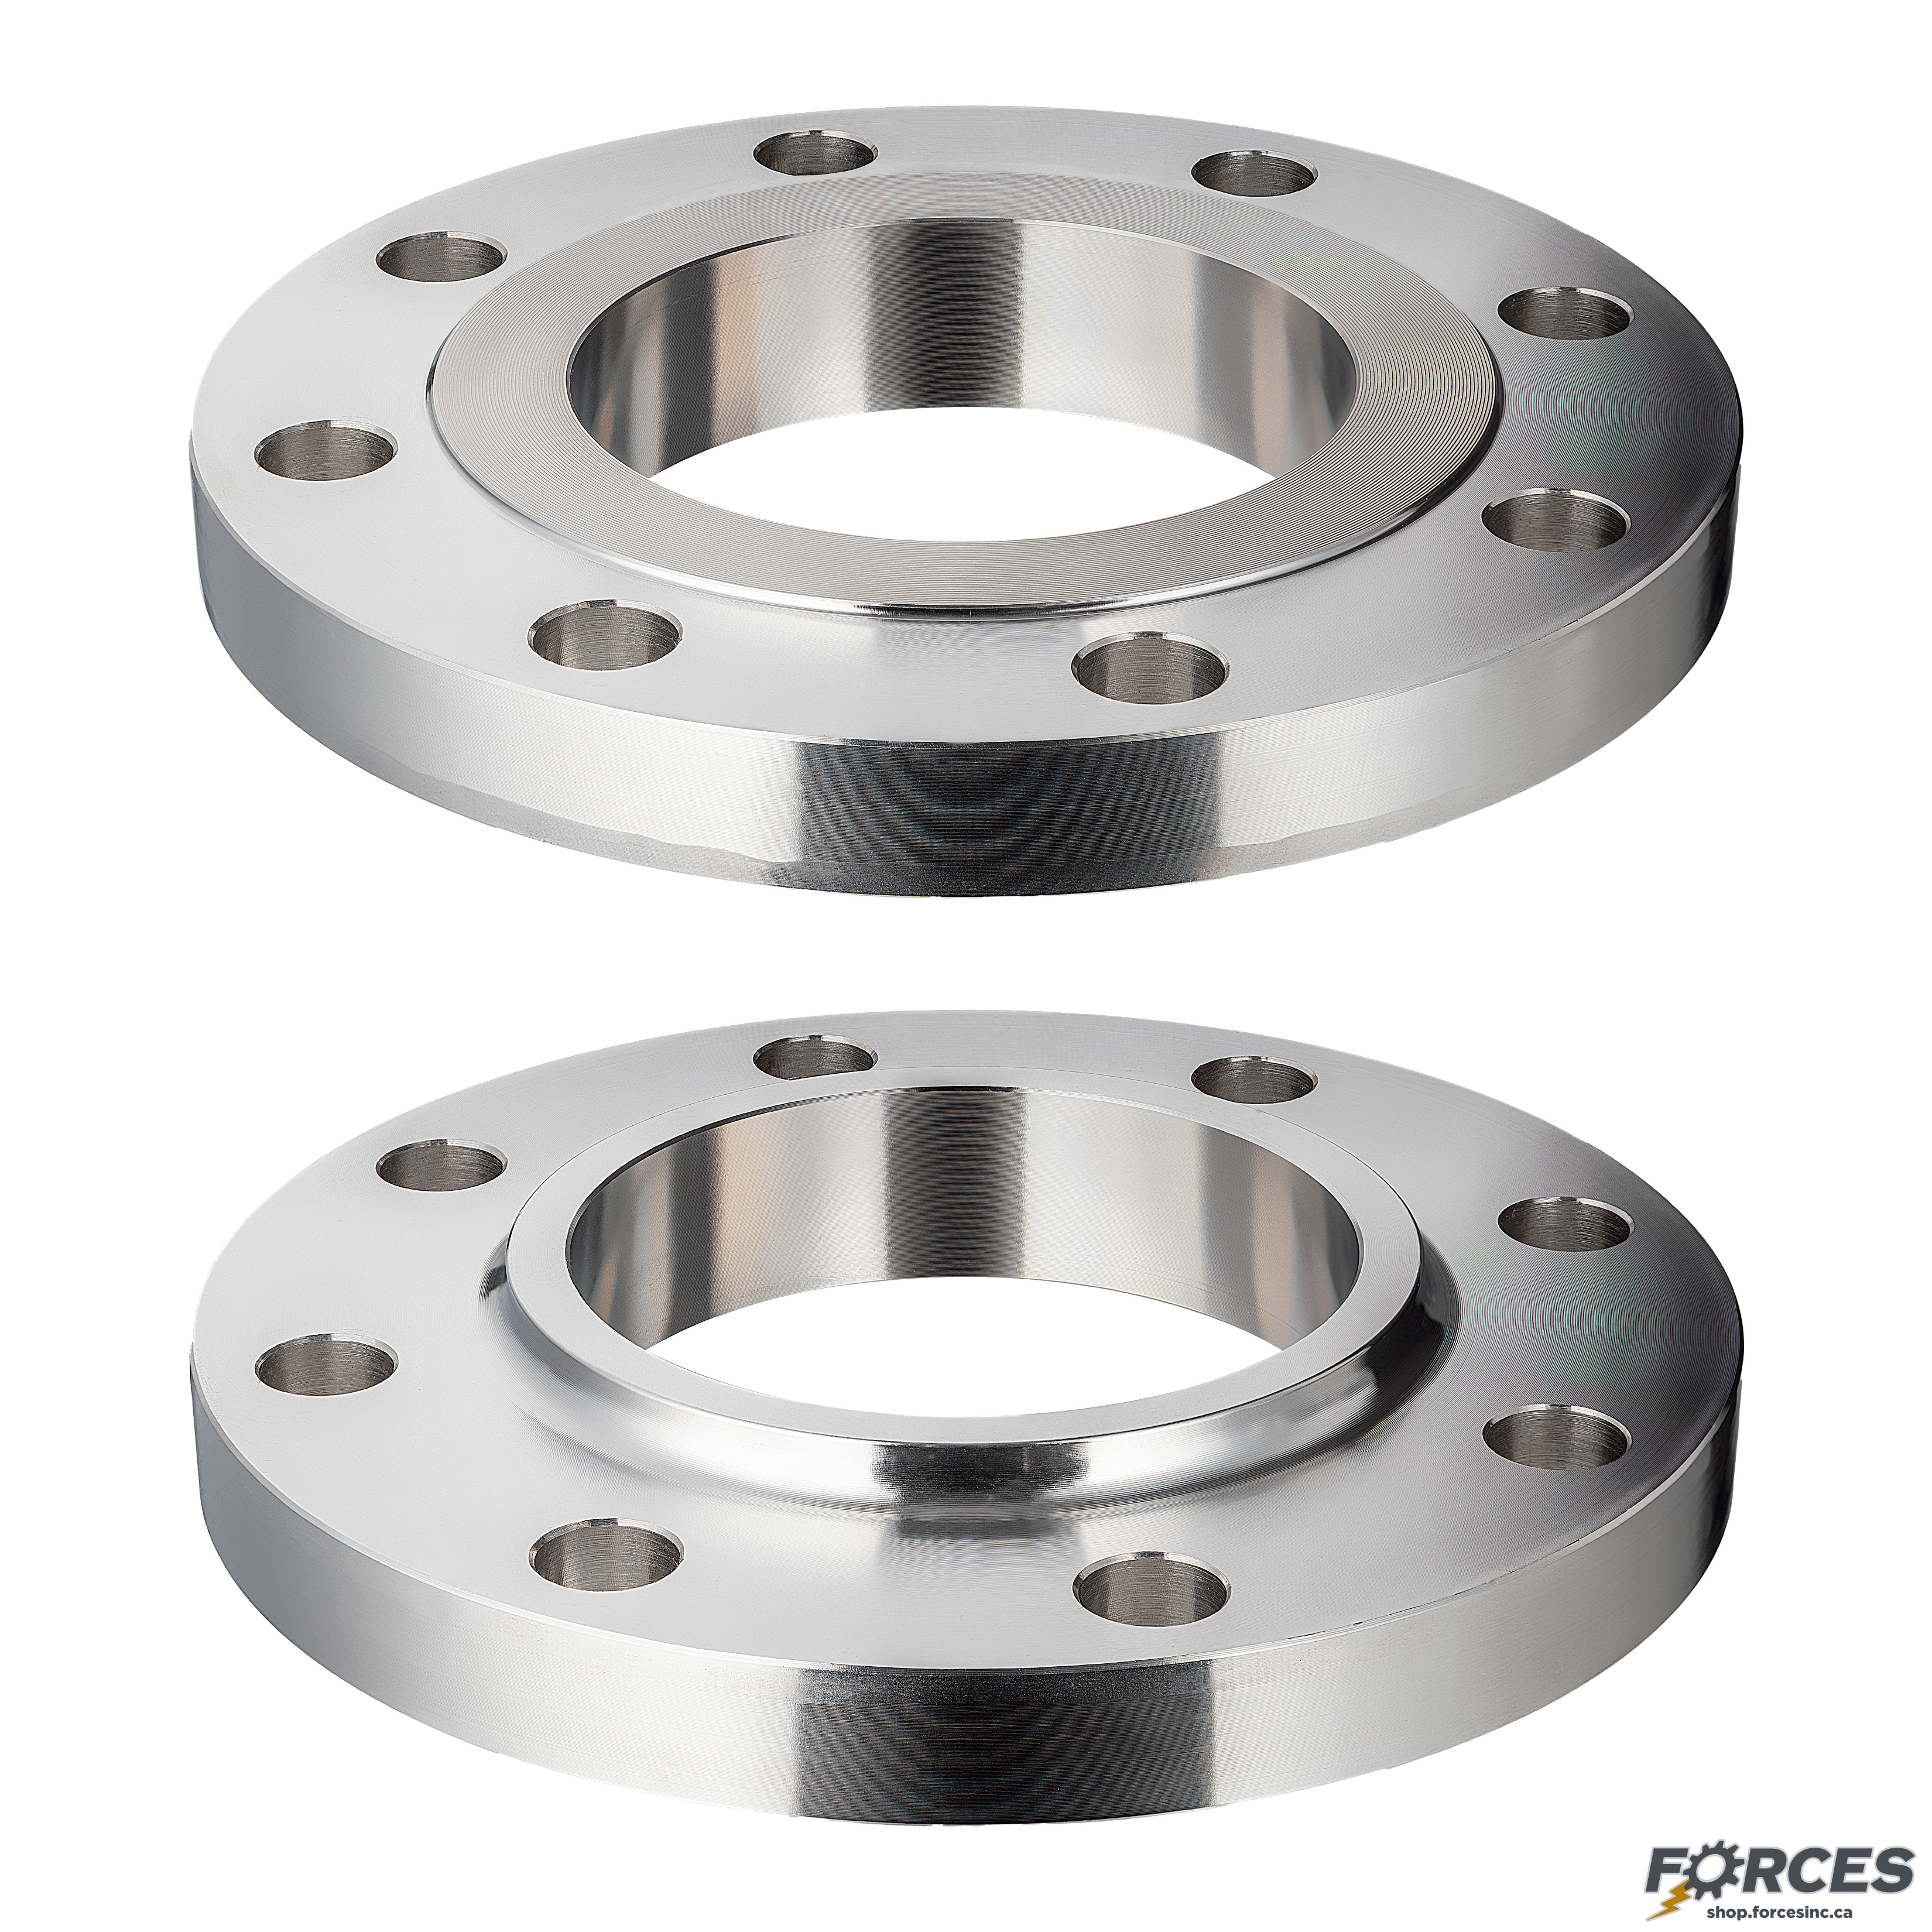 4" Slip-On Flange Class #150 - Stainless Steel 316 - Forces Inc